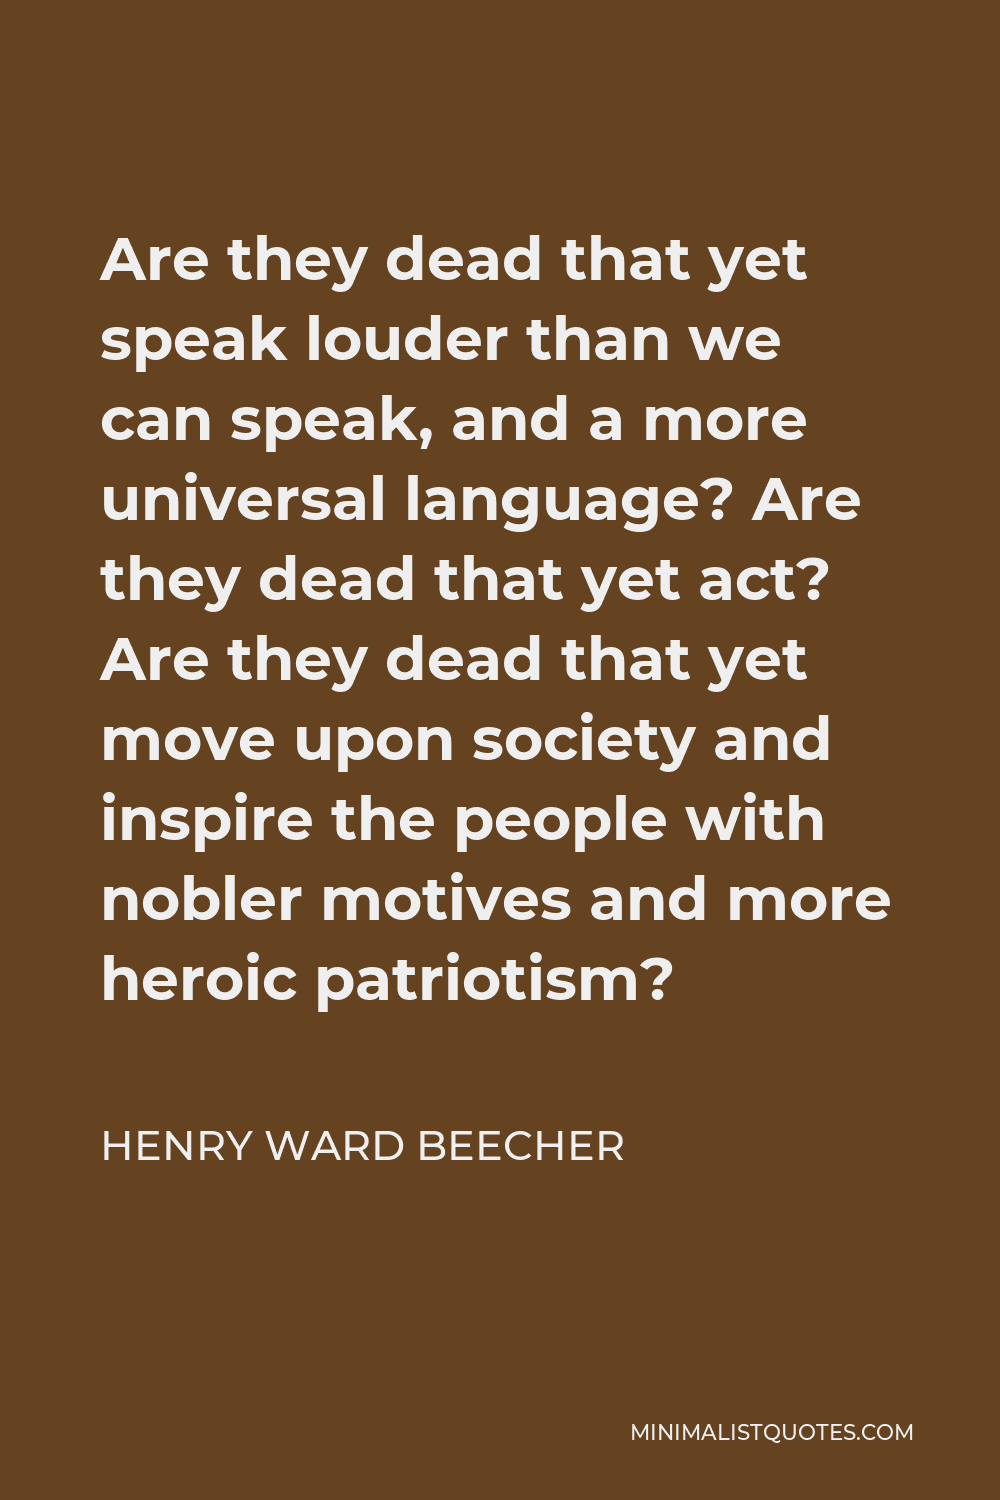 Henry Ward Beecher Quote - Are they dead that yet speak louder than we can speak, and a more universal language? Are they dead that yet act? Are they dead that yet move upon society and inspire the people with nobler motives and more heroic patriotism?